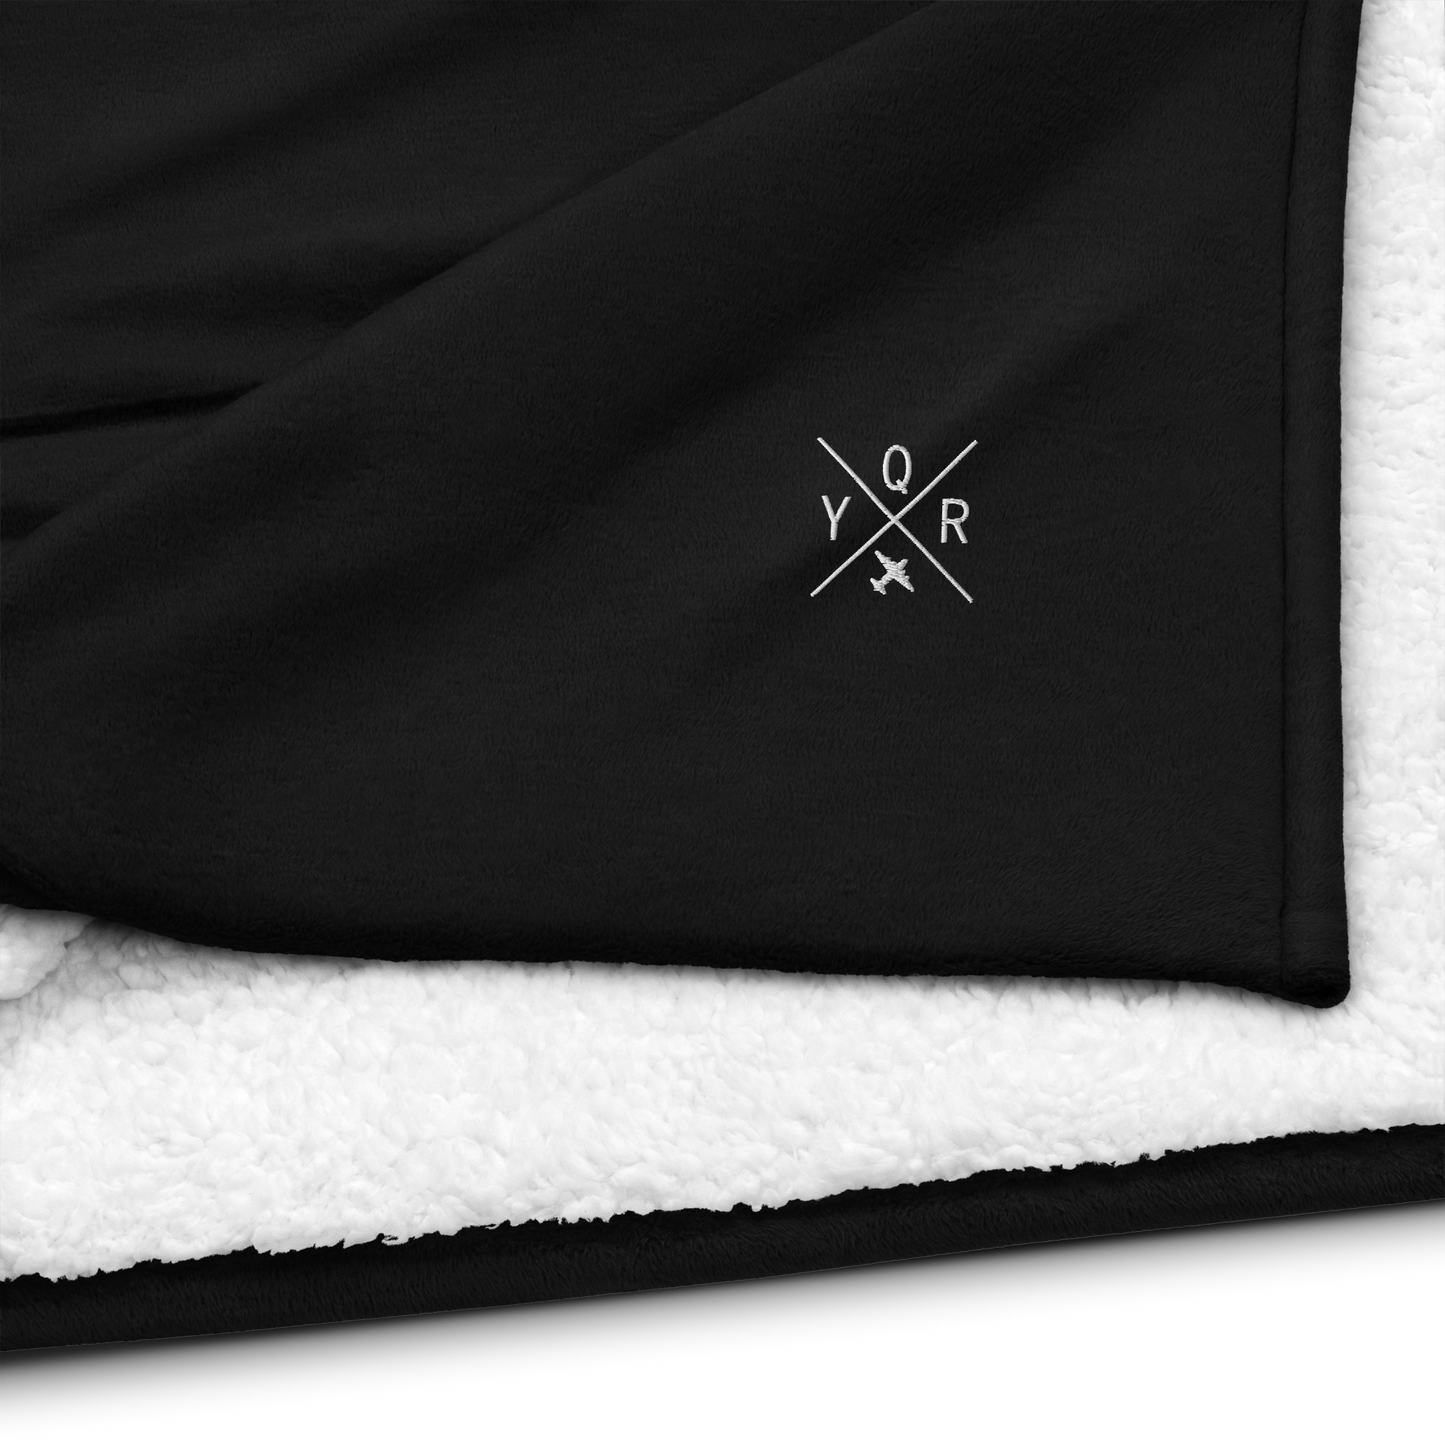 YHM Designs - YQR Regina Premium Sherpa Blanket - Crossed-X Design with Airport Code and Vintage Propliner - White Embroidery - Image 03